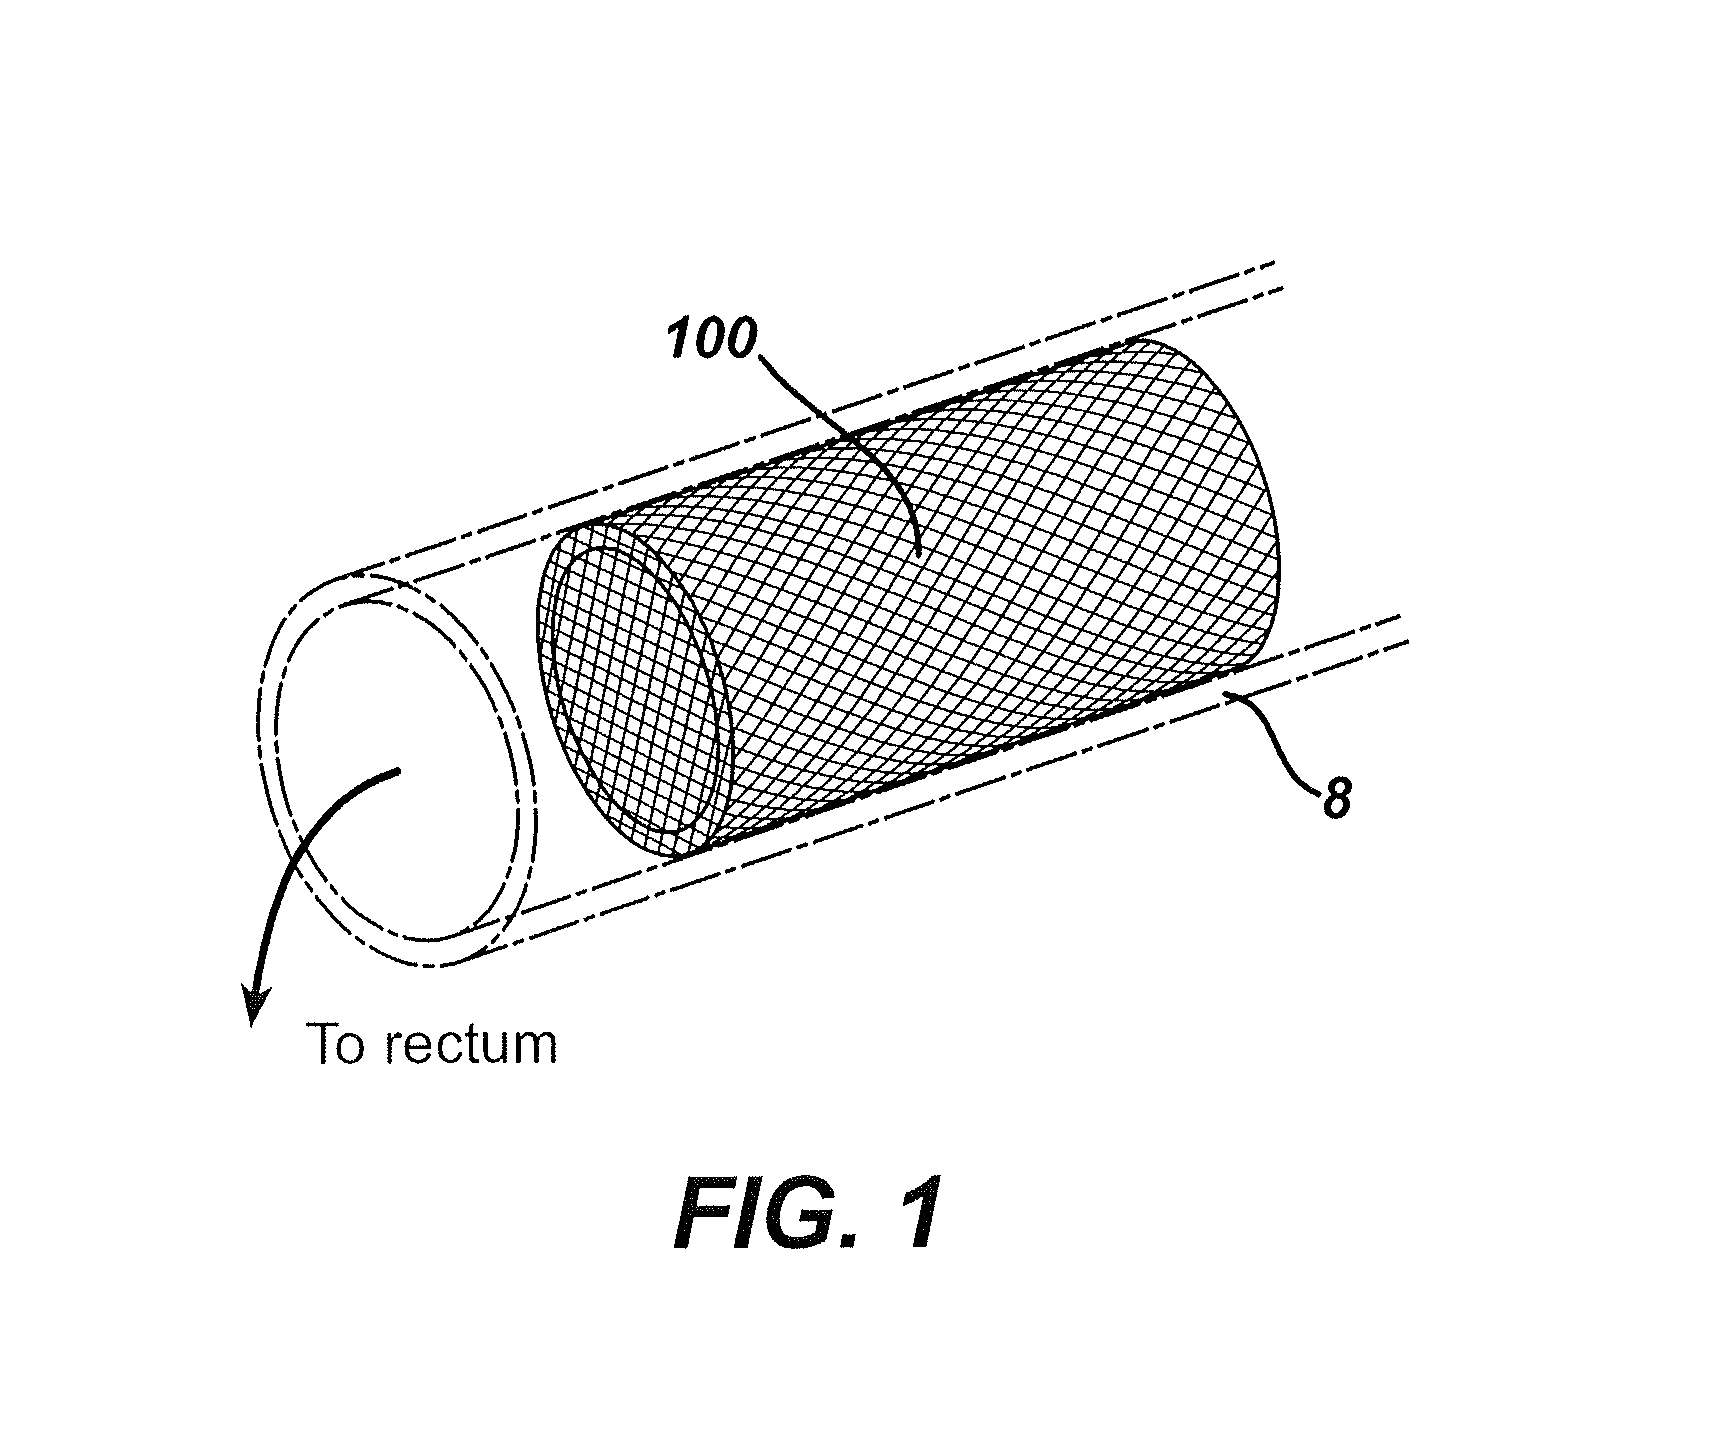 Intestinal brake inducing intraluminal therapeutic substance eluting devices and methods